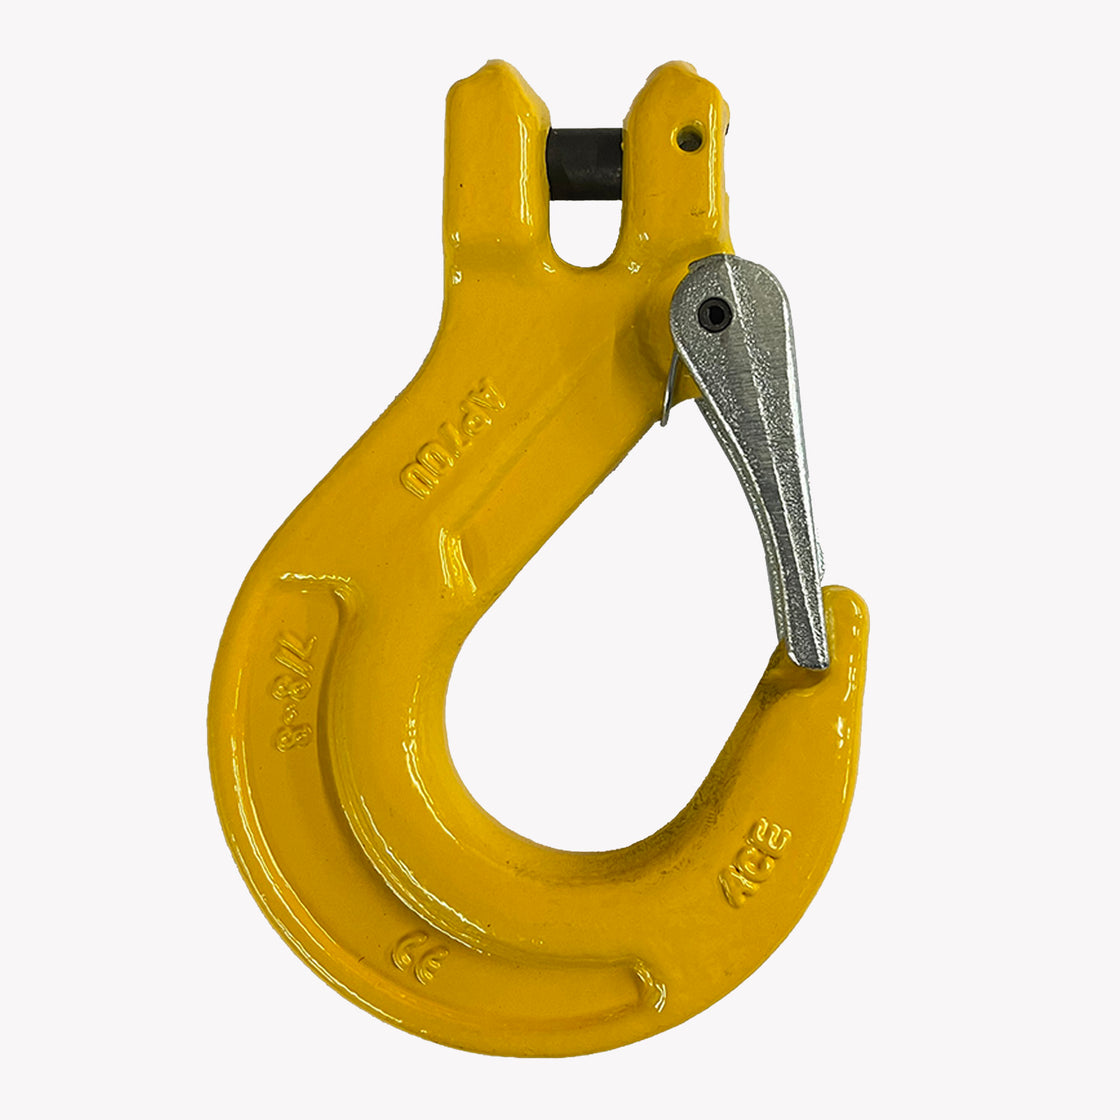 GRADE 80 CLEVIS SLING HOOK WITH SAFETY CATCH - PGS Supplies 21 Ltd